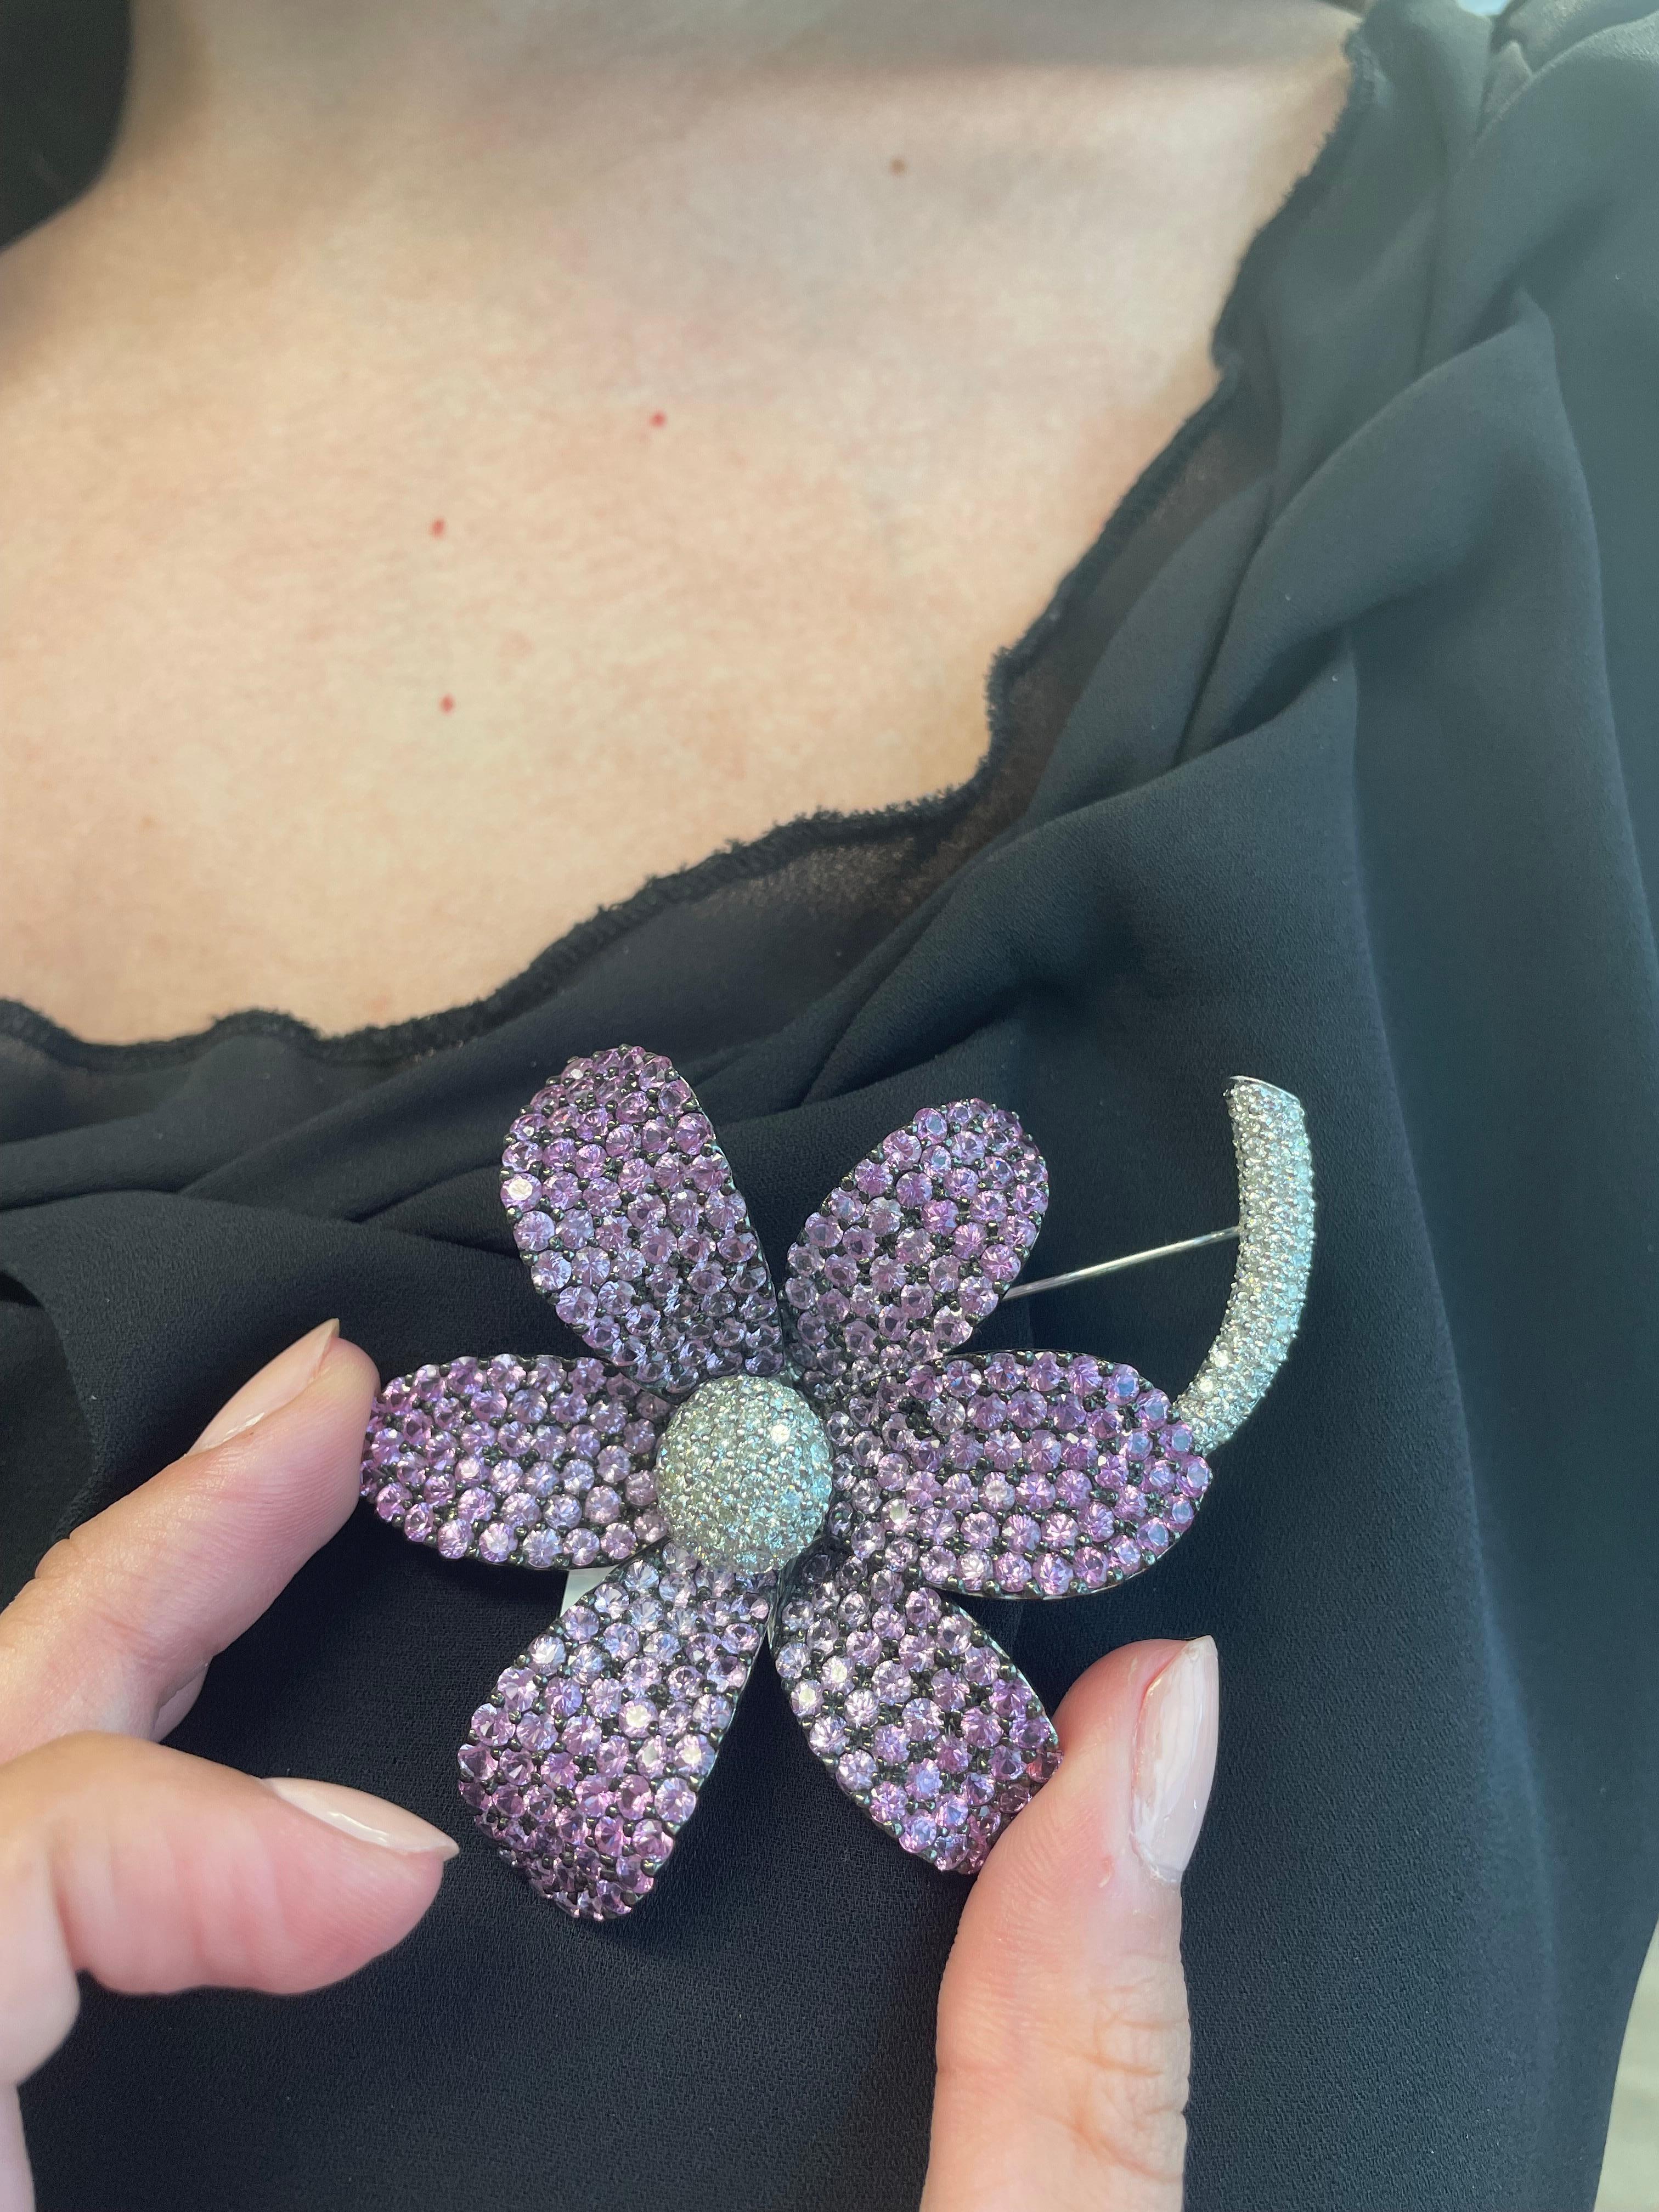 Stunning pink sapphire with diamonds flower brooch. 
20.20 carats of round cut pink sapphires heat. Complimented by 3.01 carats of round brilliant diamonds. Approximately G/H color grade and SI clarity grade. 18-karat white gold, 3in length. 
23.21